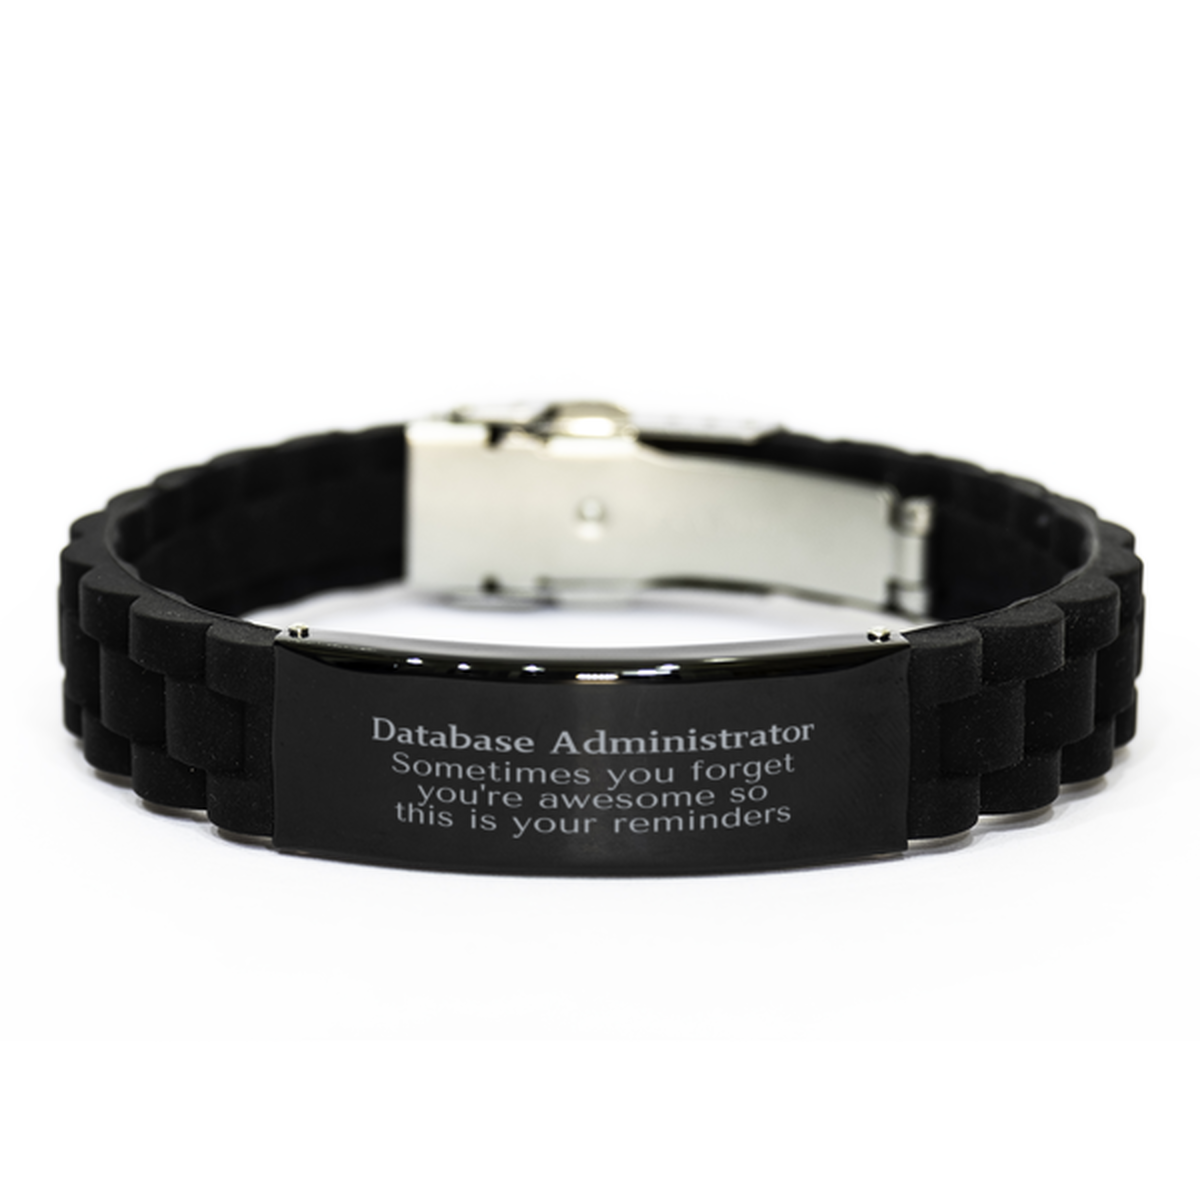 Sentimental Database Administrator Black Glidelock Clasp Bracelet, Database Administrator Sometimes you forget you're awesome so this is your reminders, Graduation Christmas Birthday Gifts for Database Administrator, Men, Women, Coworkers